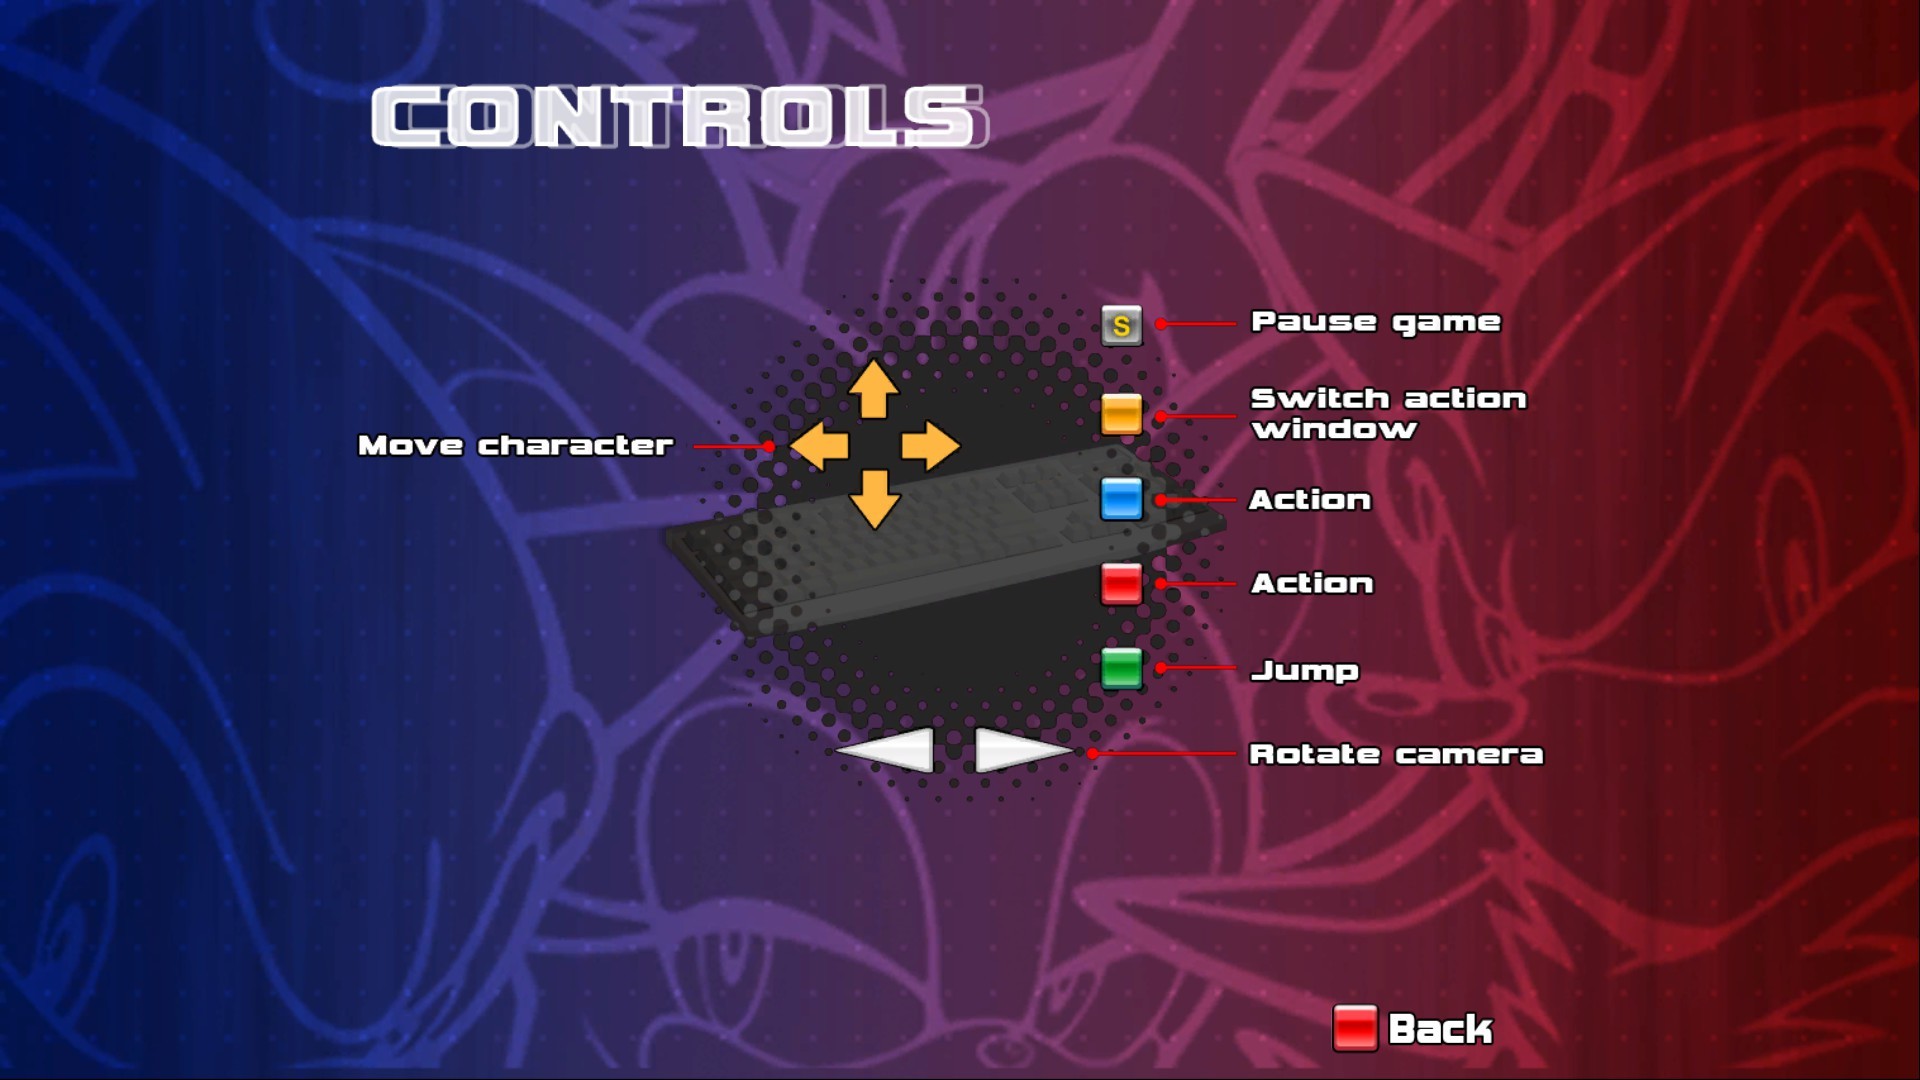 1920x1080 Thank you Sonic Adventure 2 for PC, now I know exactly what buttons do what.